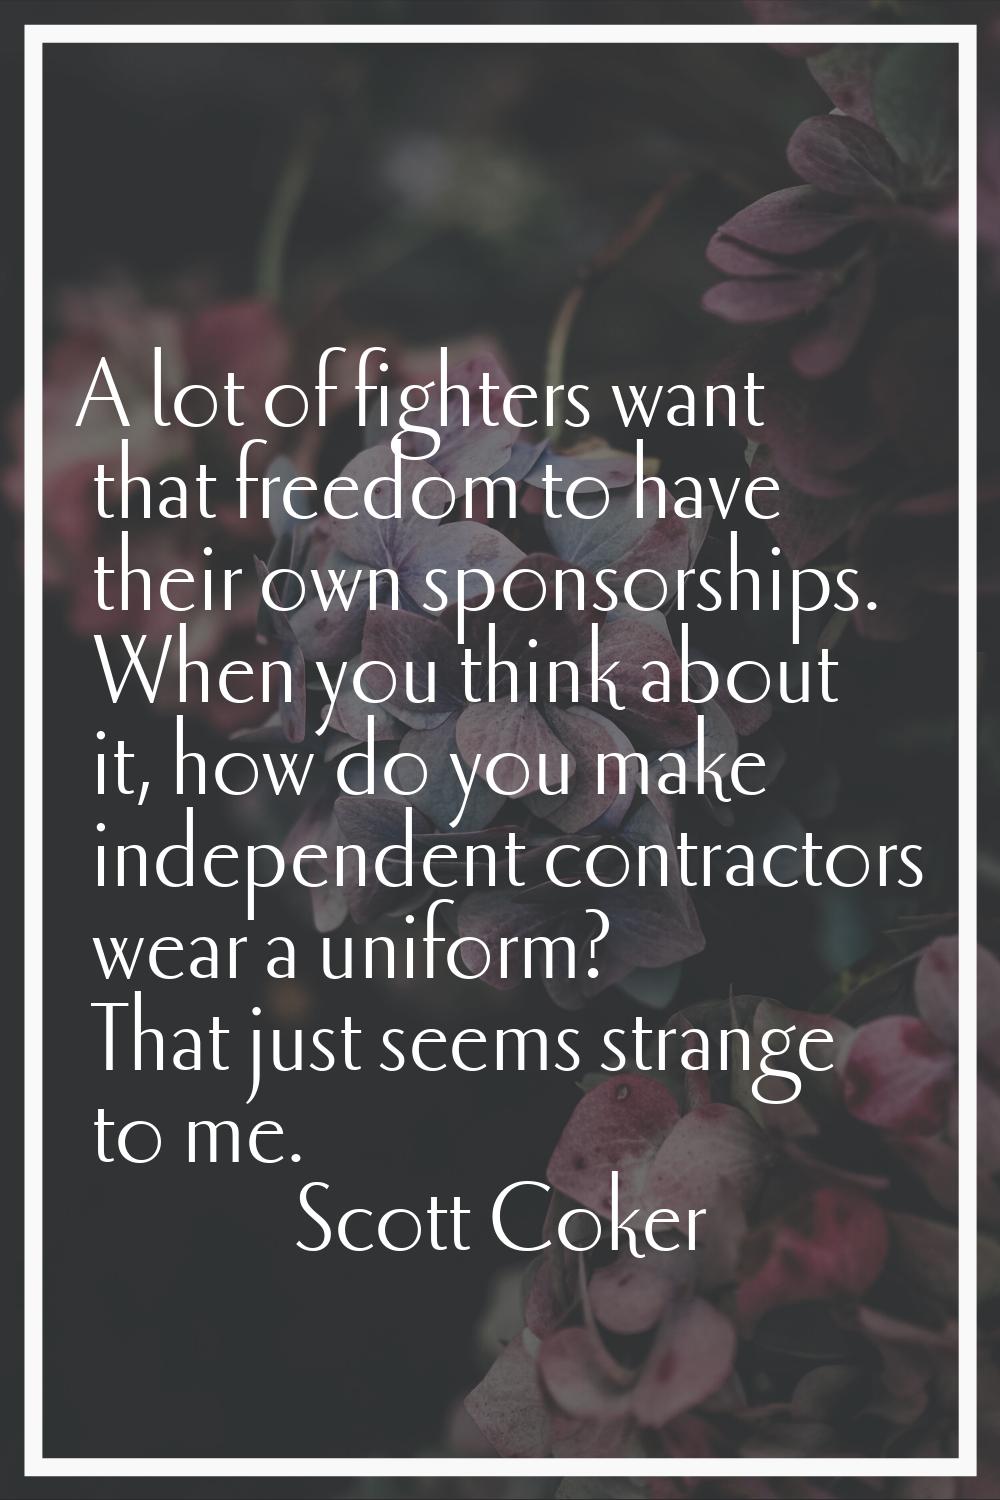 A lot of fighters want that freedom to have their own sponsorships. When you think about it, how do